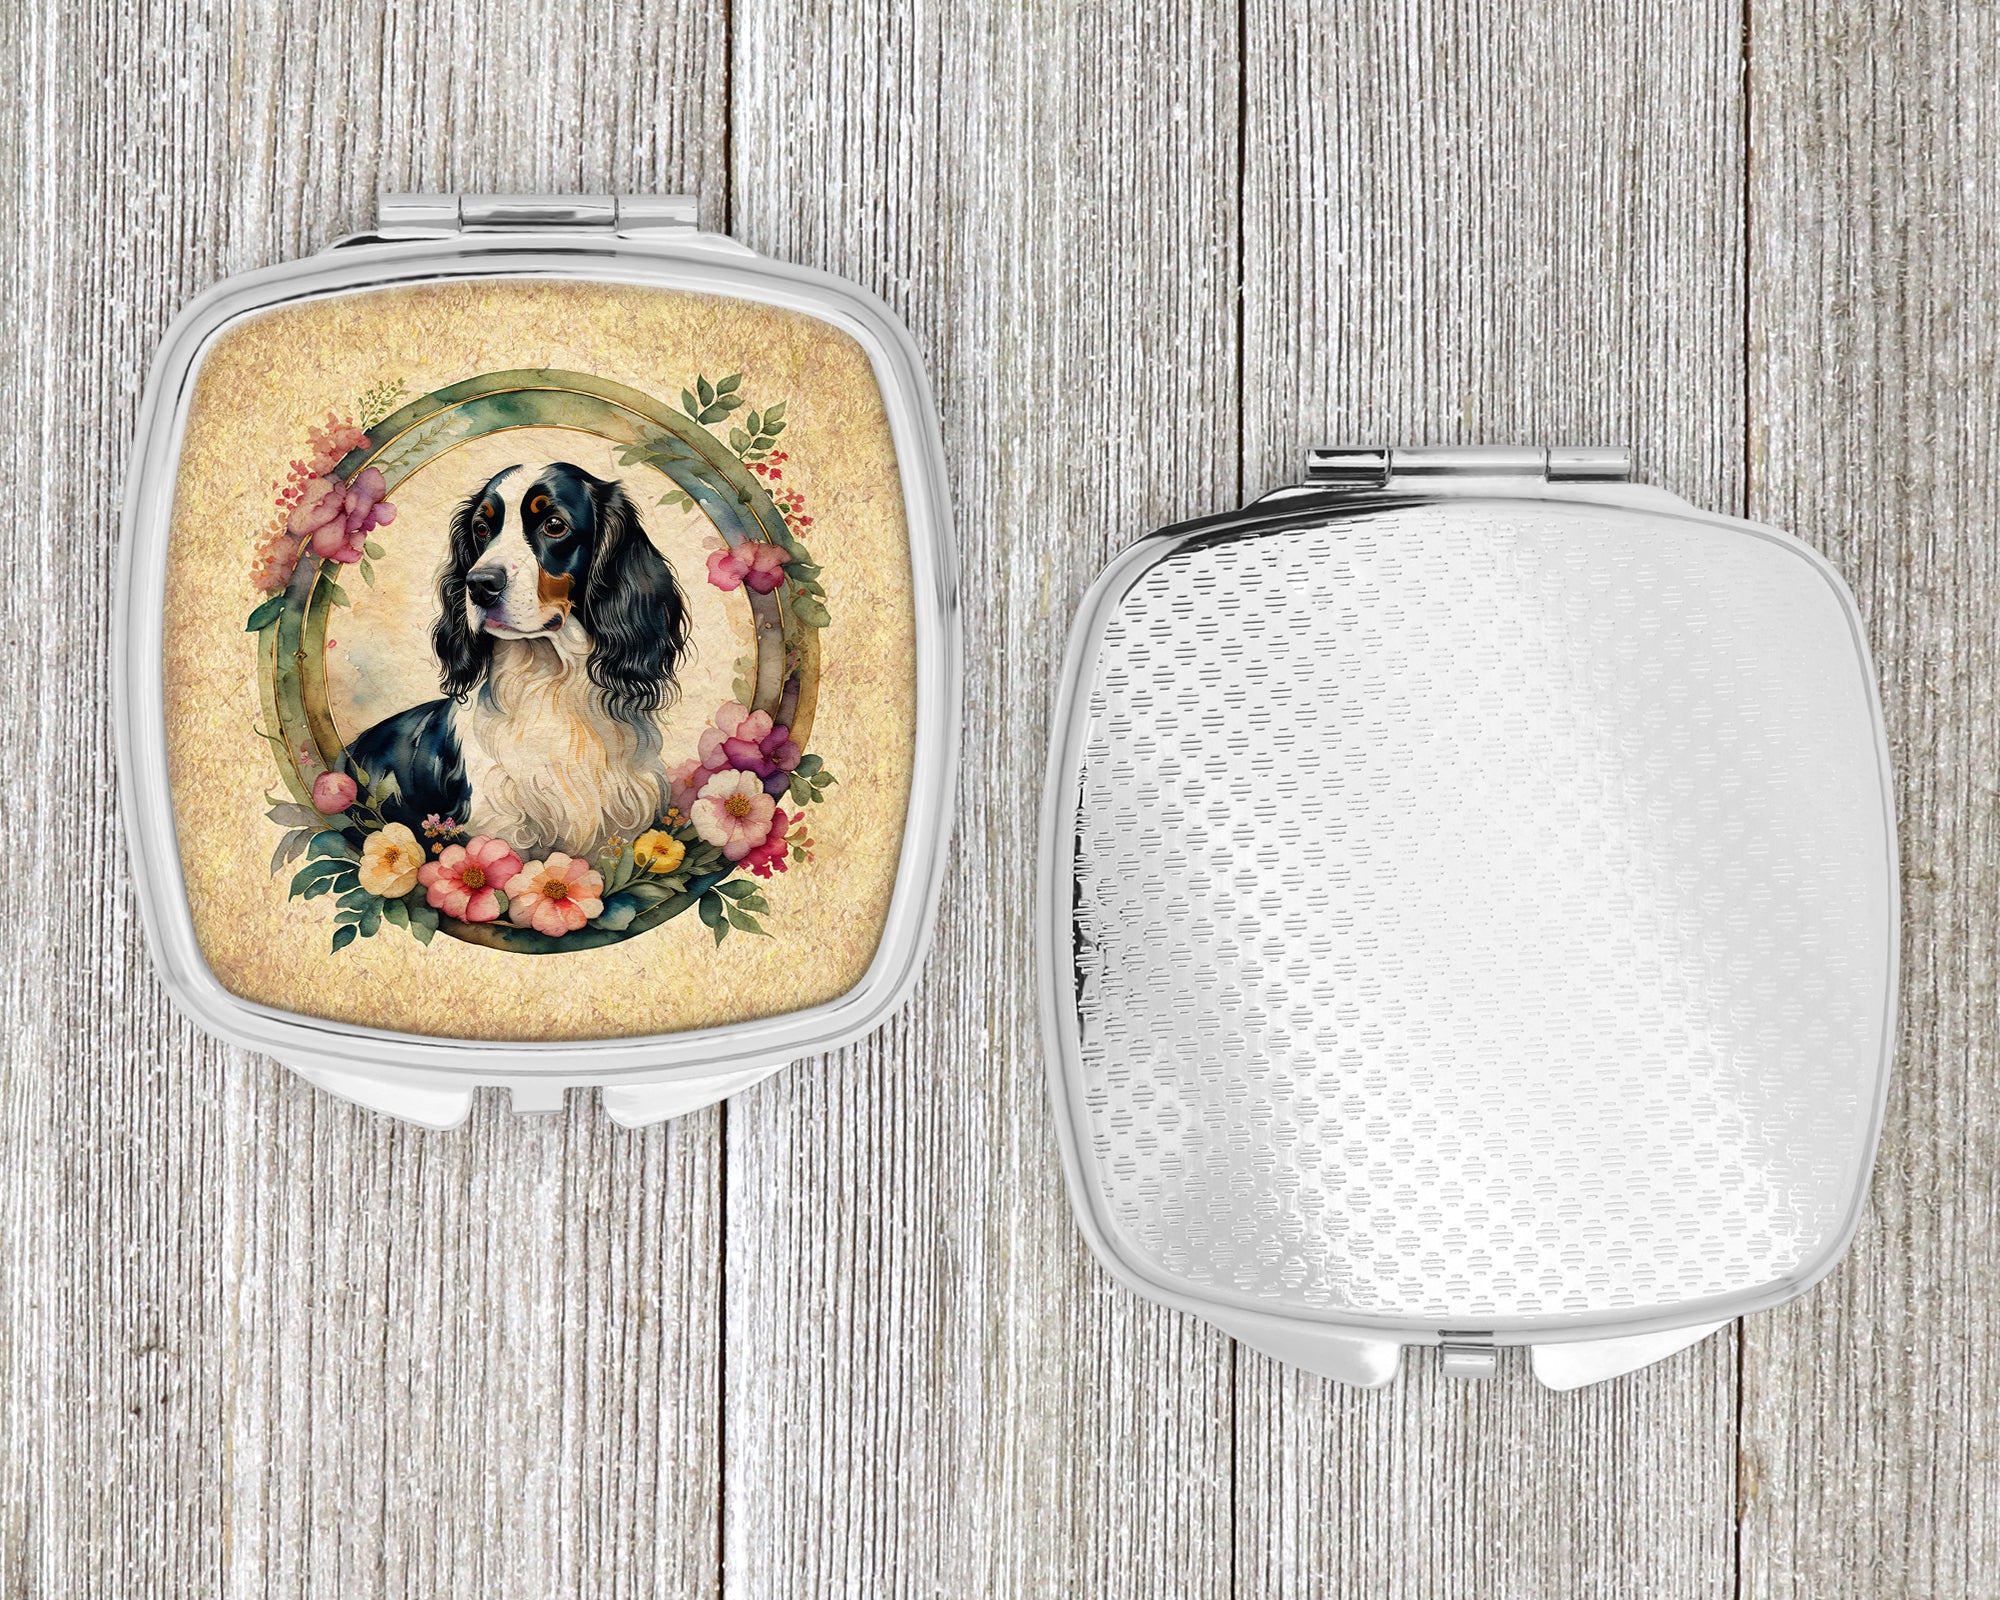 English Springer Spaniel and Flowers Compact Mirror